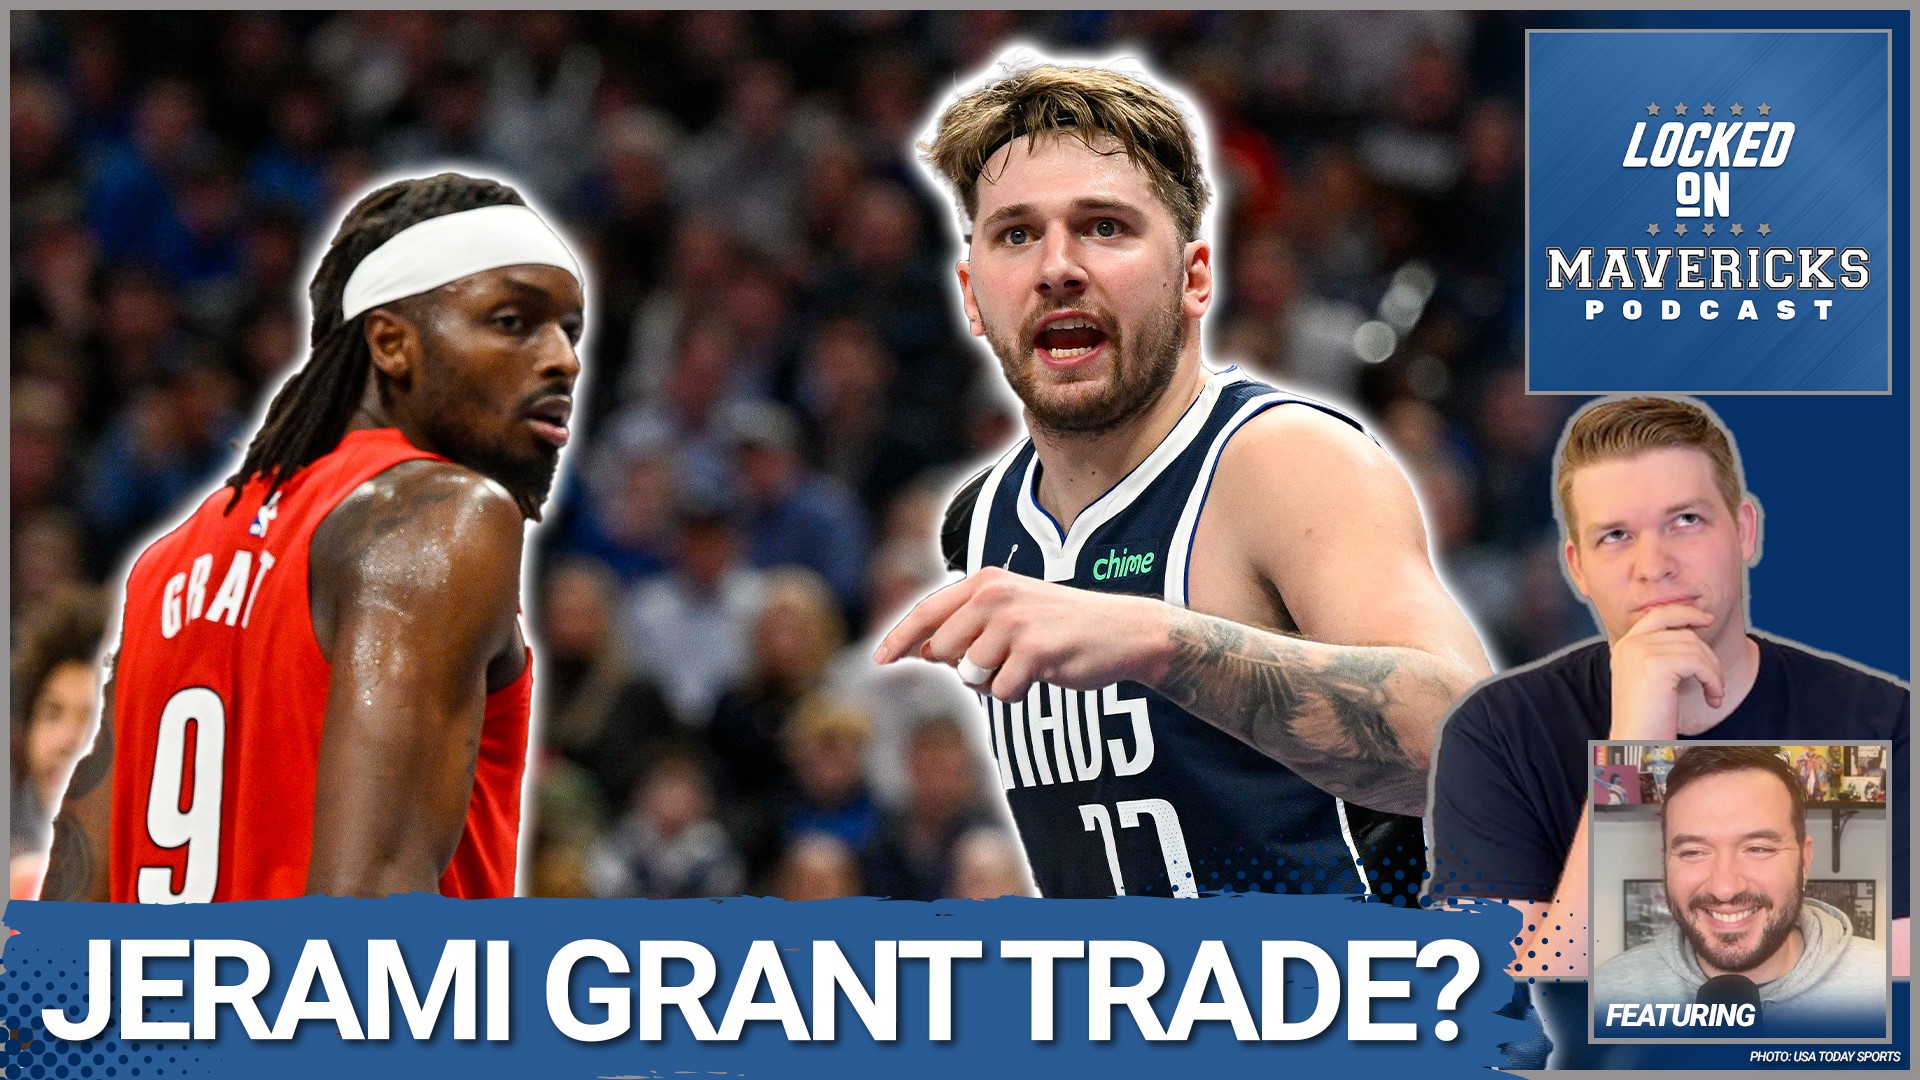 Nick Angstadt is joined by Mike Richman to discuss a potential Jerami Grant Trade to the Dallas Mavericks and the Mavs' next matchup with the Trail Blazers.